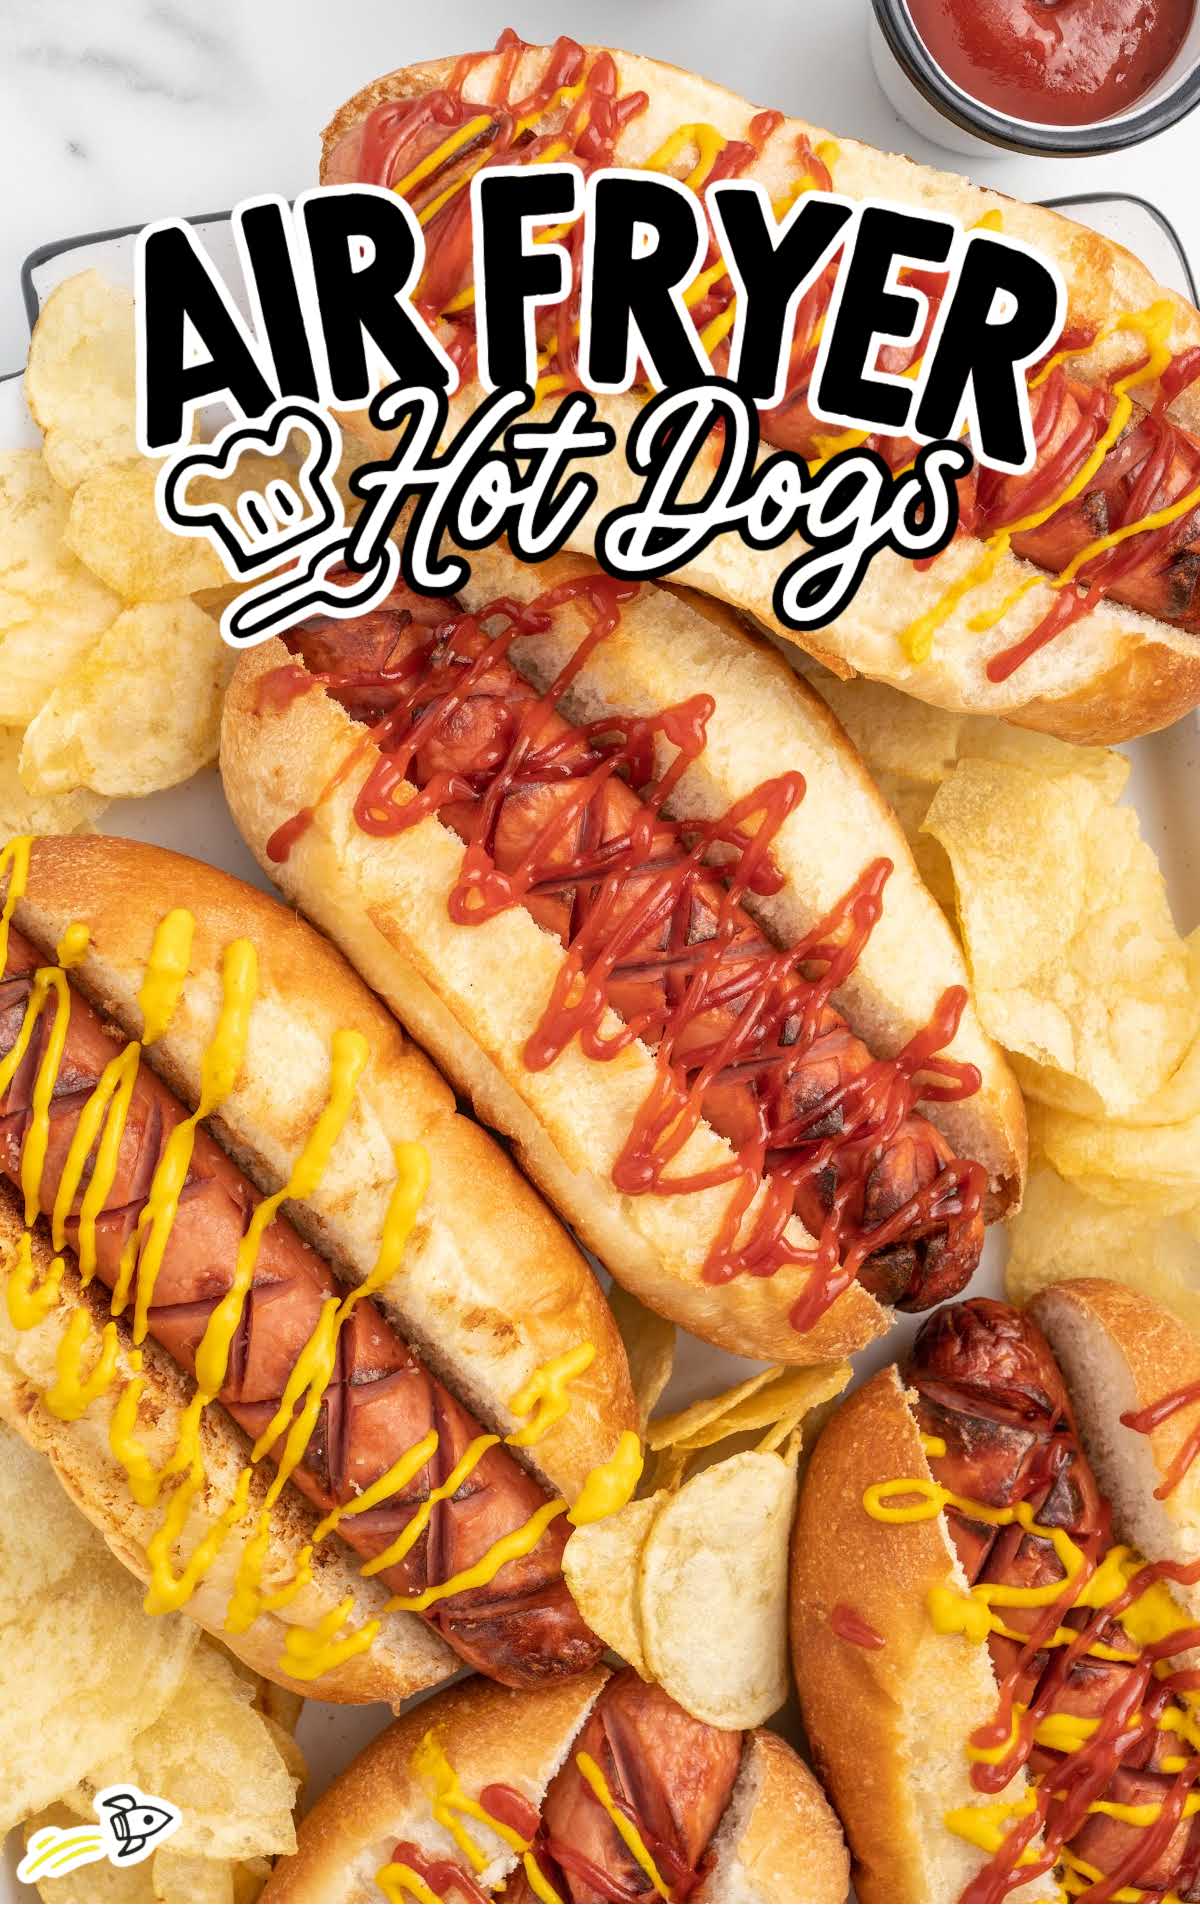 Hot Dogs topped with ketchup and mustard served with chips